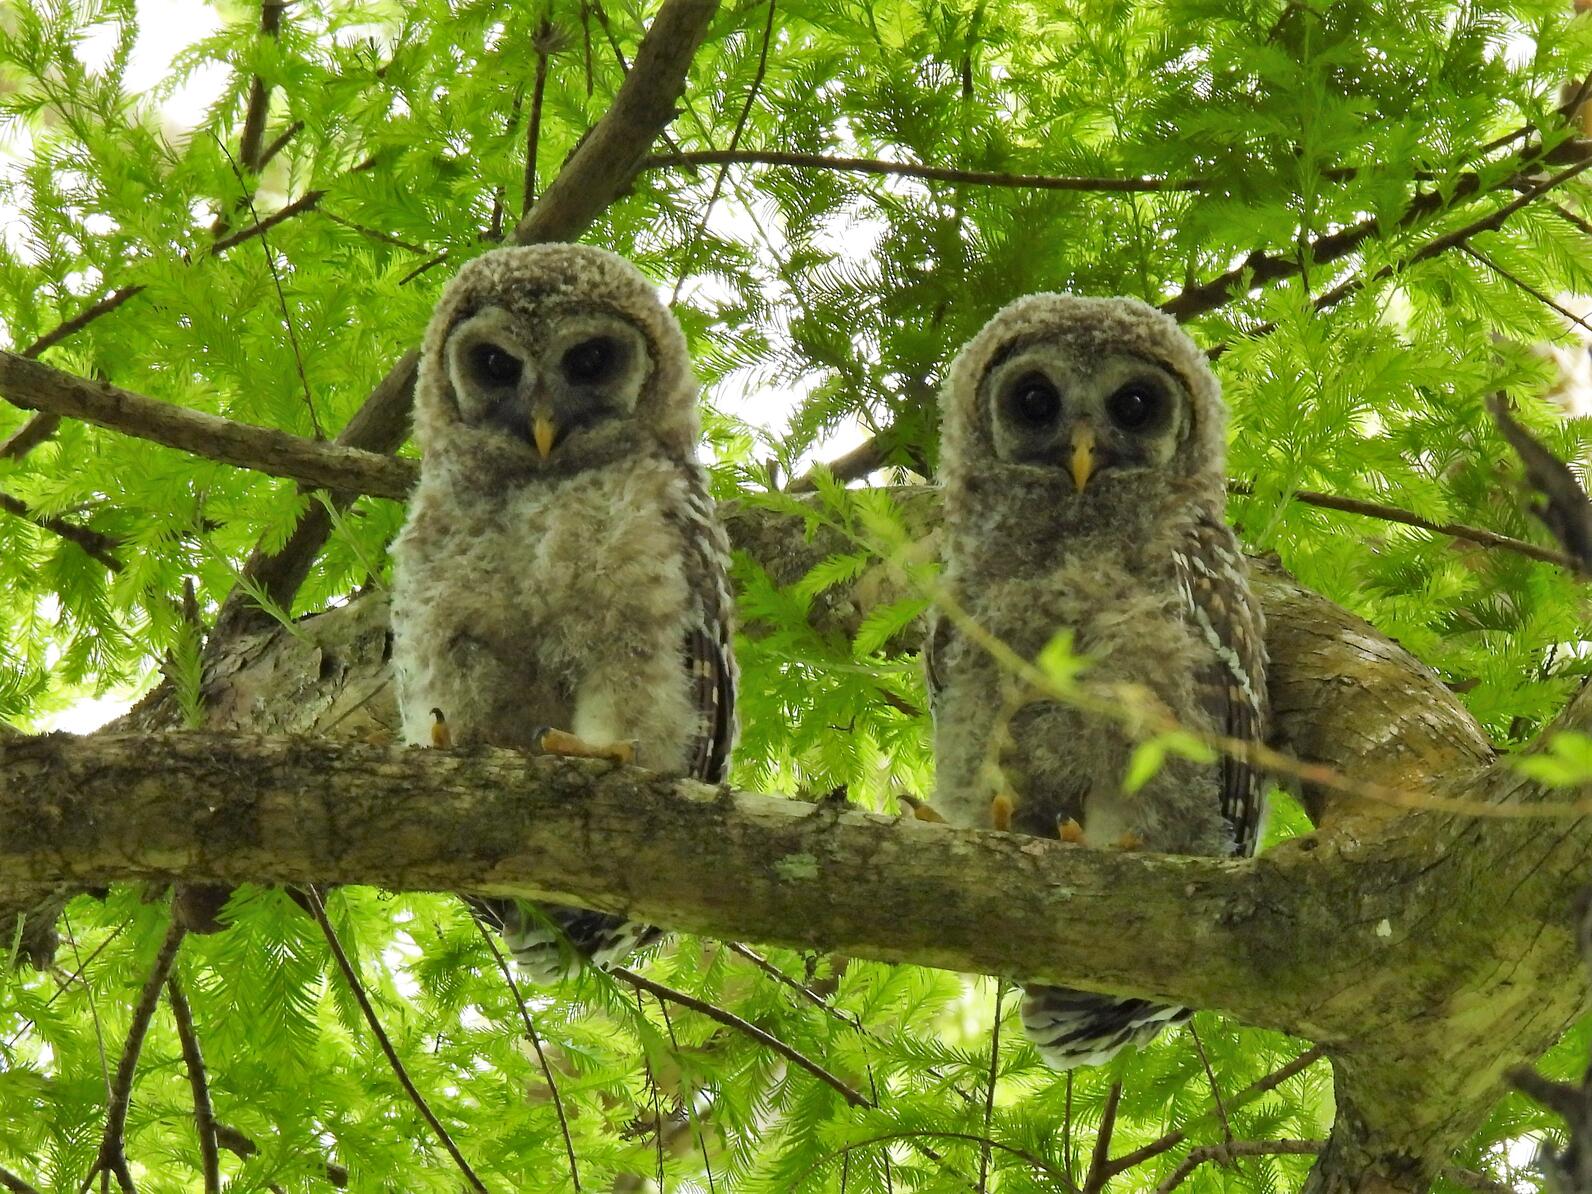 Barred owlets in a tree